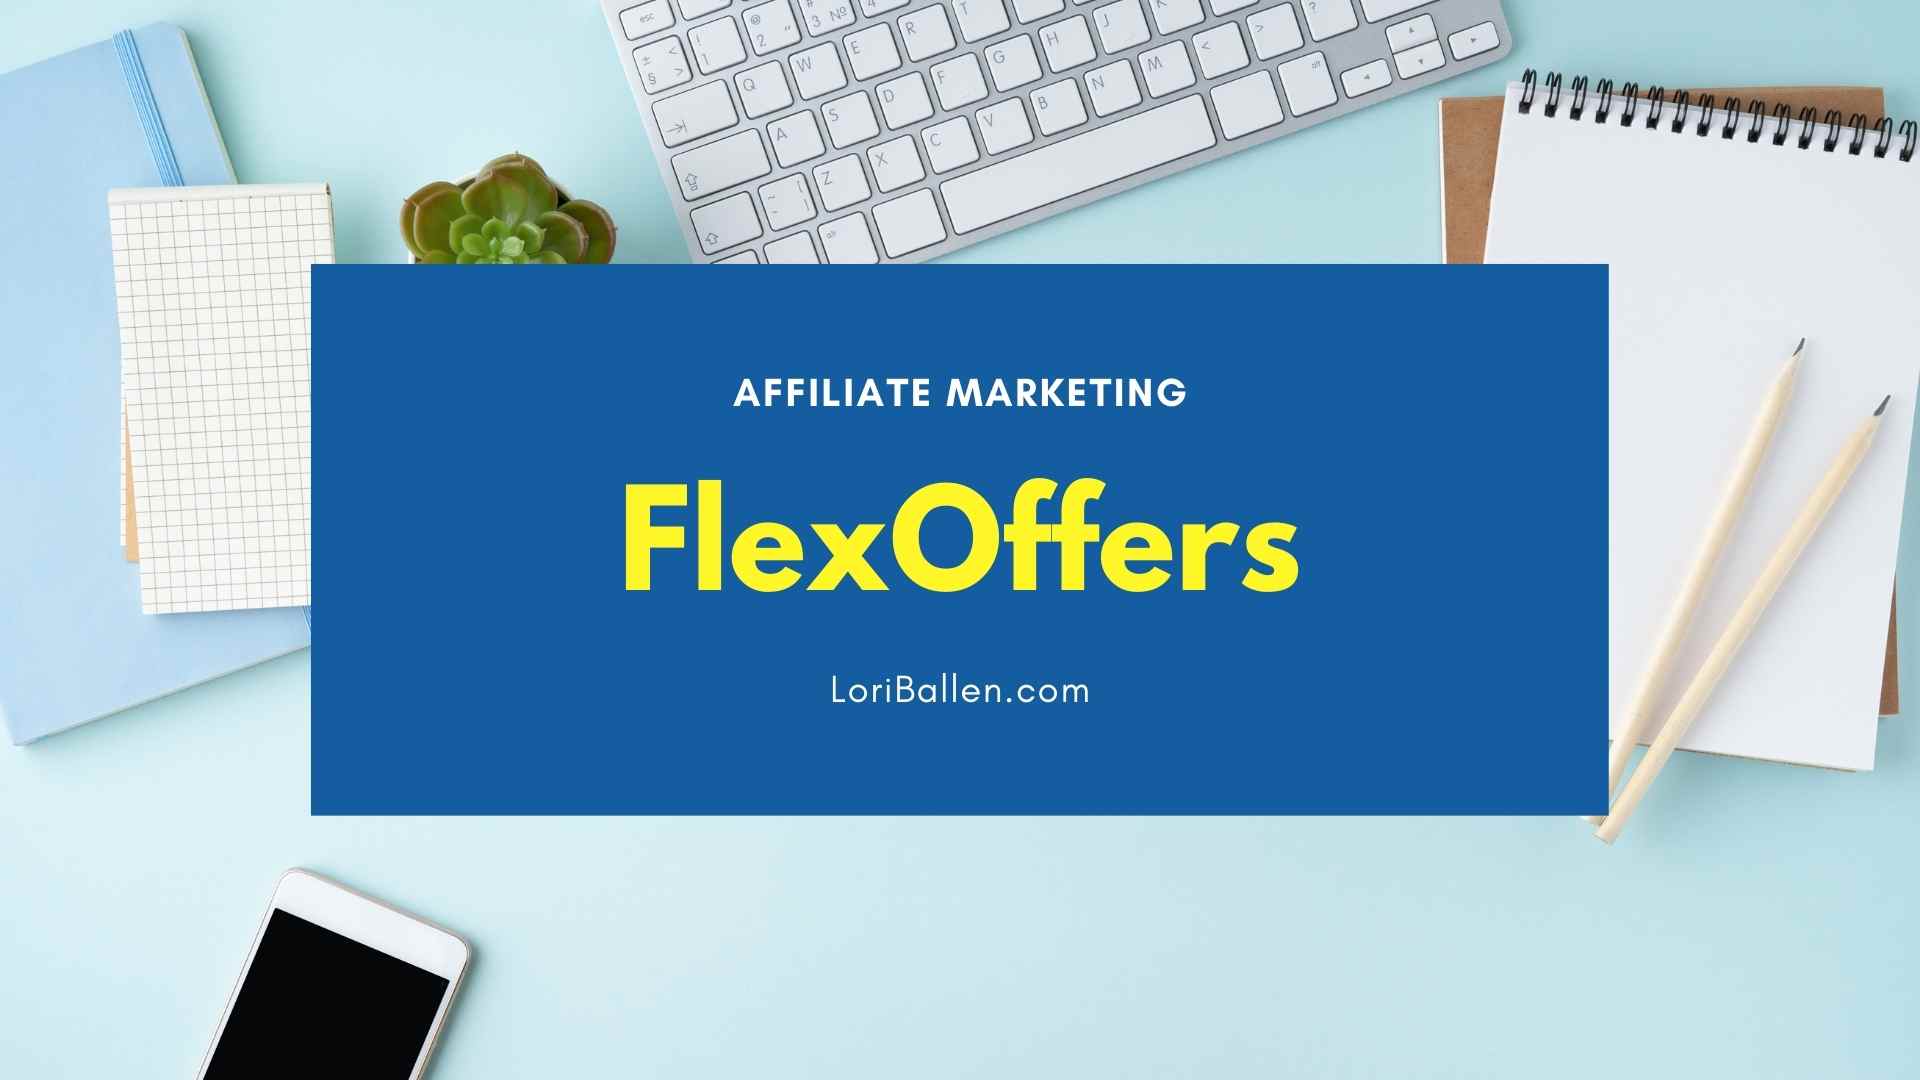 If you're looking for a new affiliate marketing network, you may be considering FlexOffers.com. 